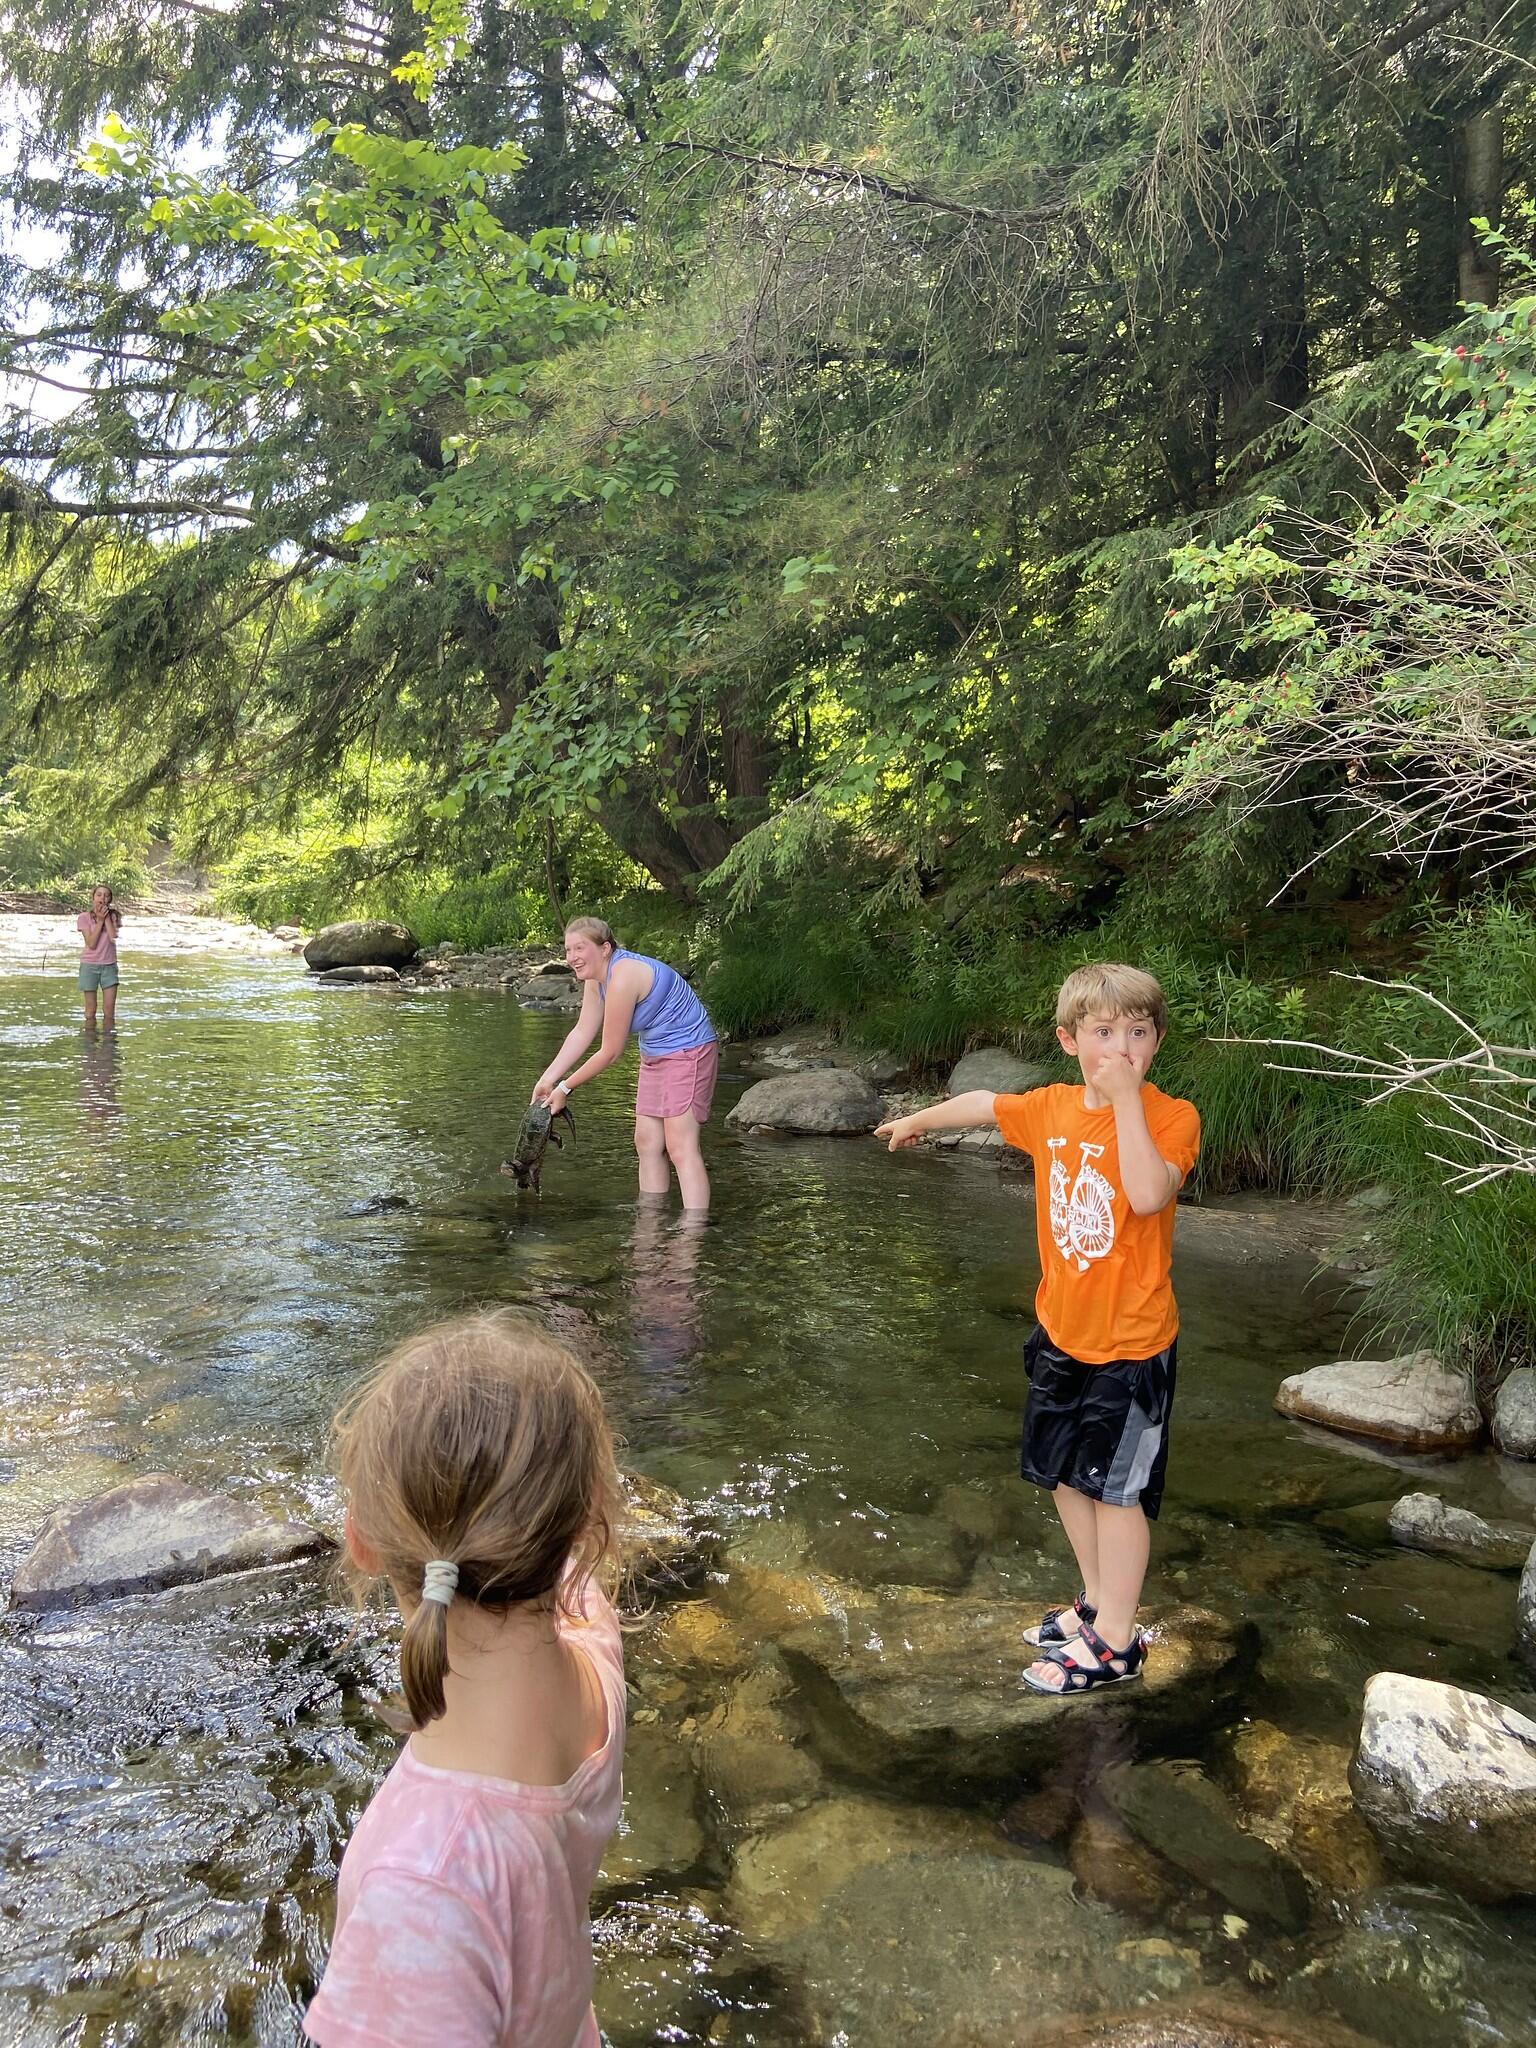 Campers look on and point in astonishment and awe from a safe distance while Naturalist Emily pulls a snapping turtle out of the water